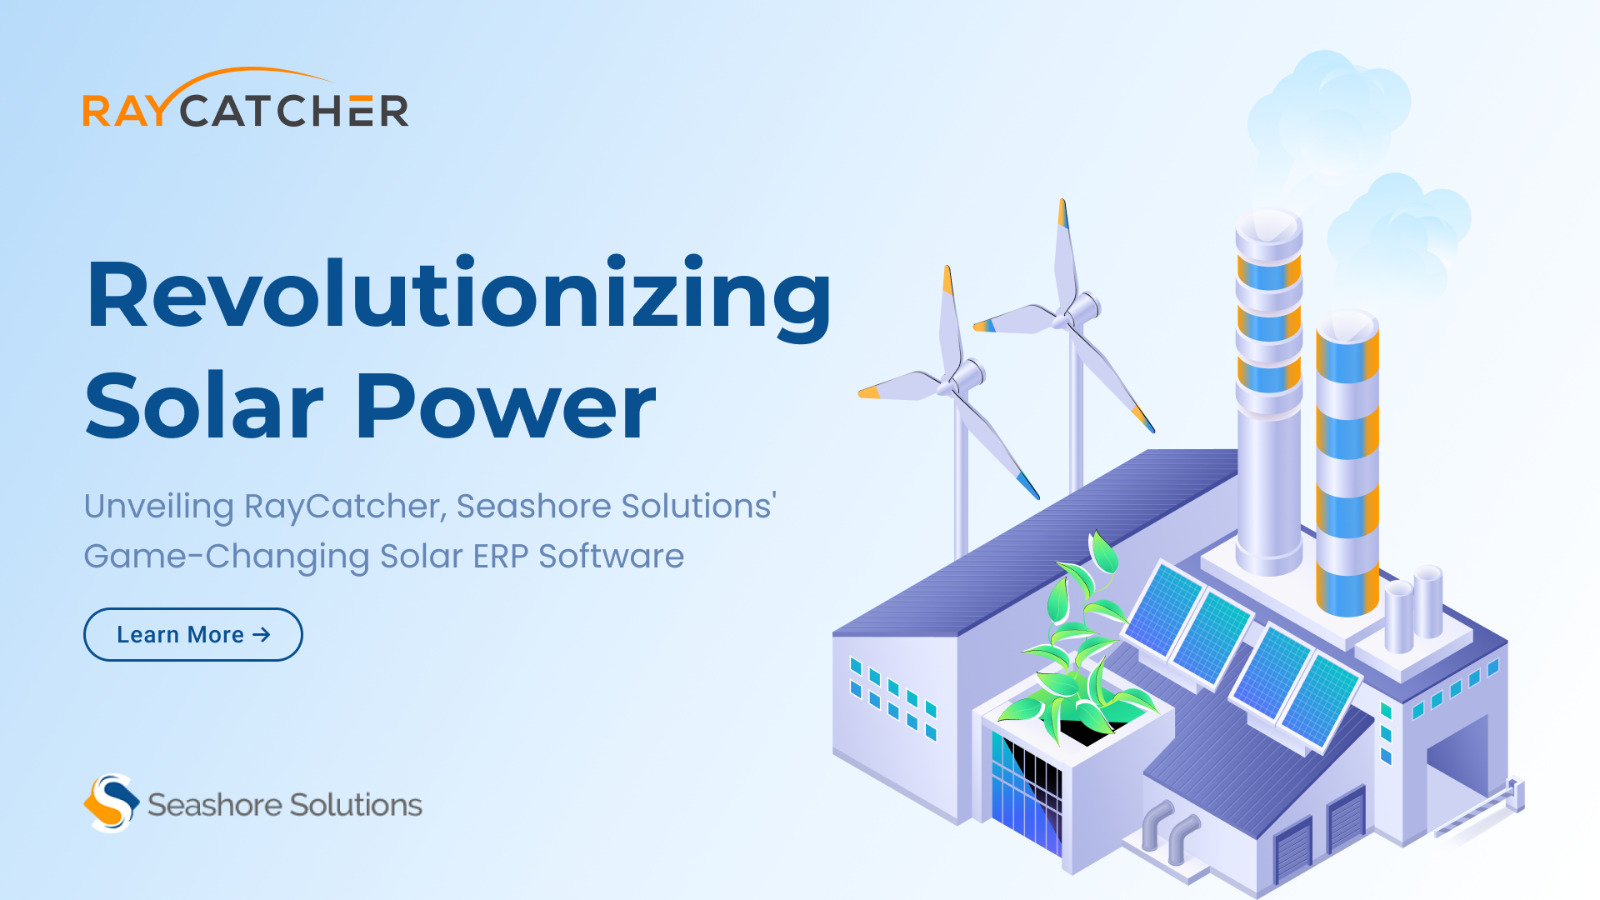 Revolutionizing Solar Power: Unveiling RayCatcher, Seashore Solutions’ Game-Changing Solar ERP Software